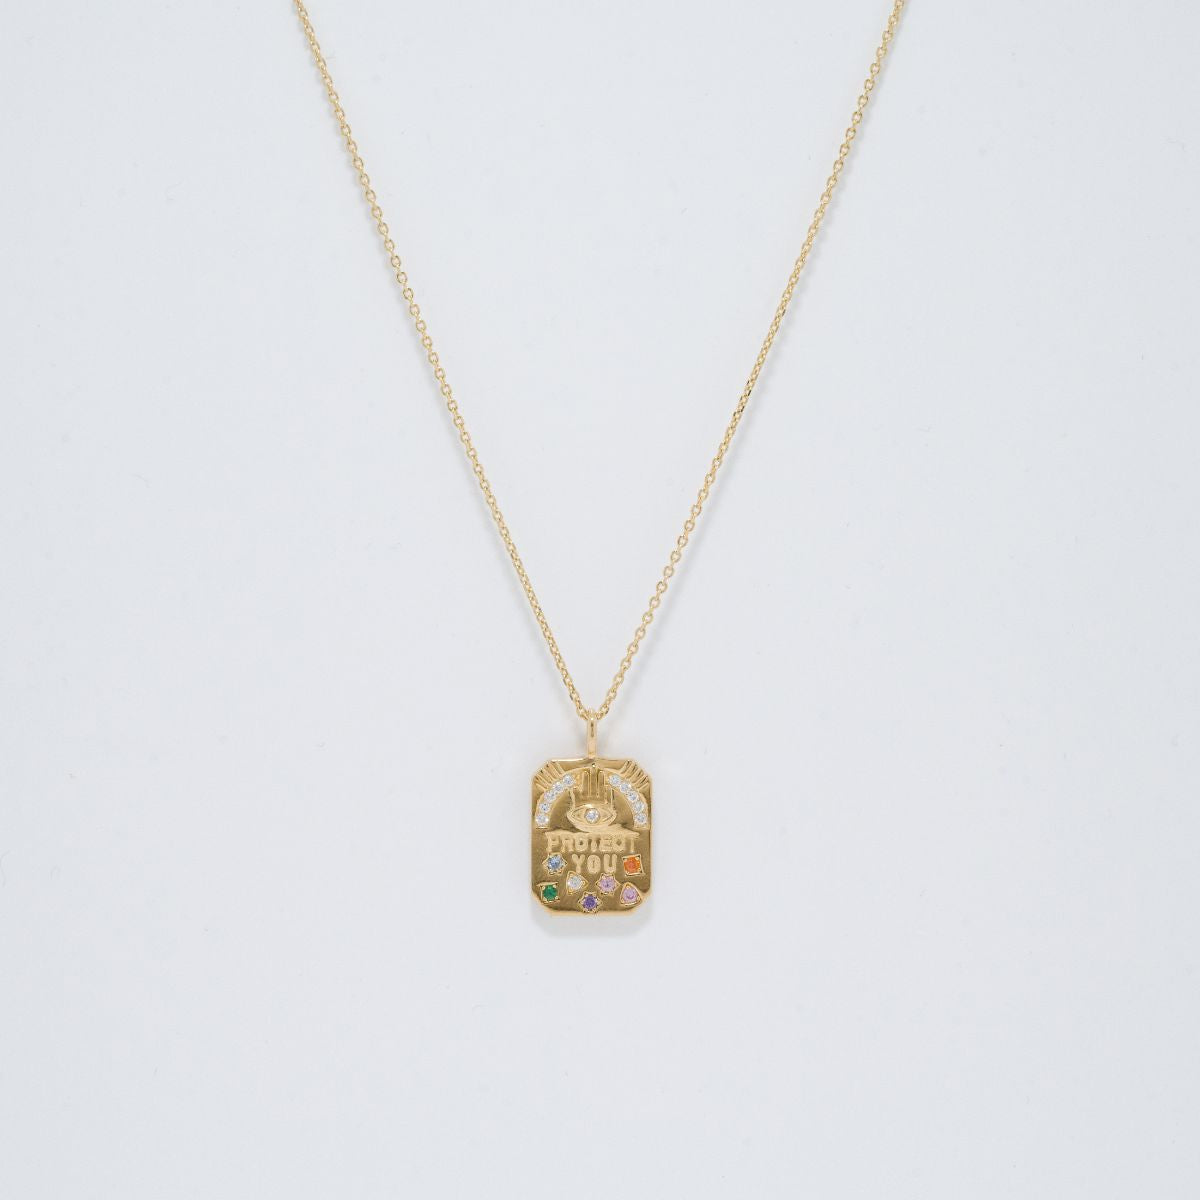 Sandra Protector Gold Pendant Necklace